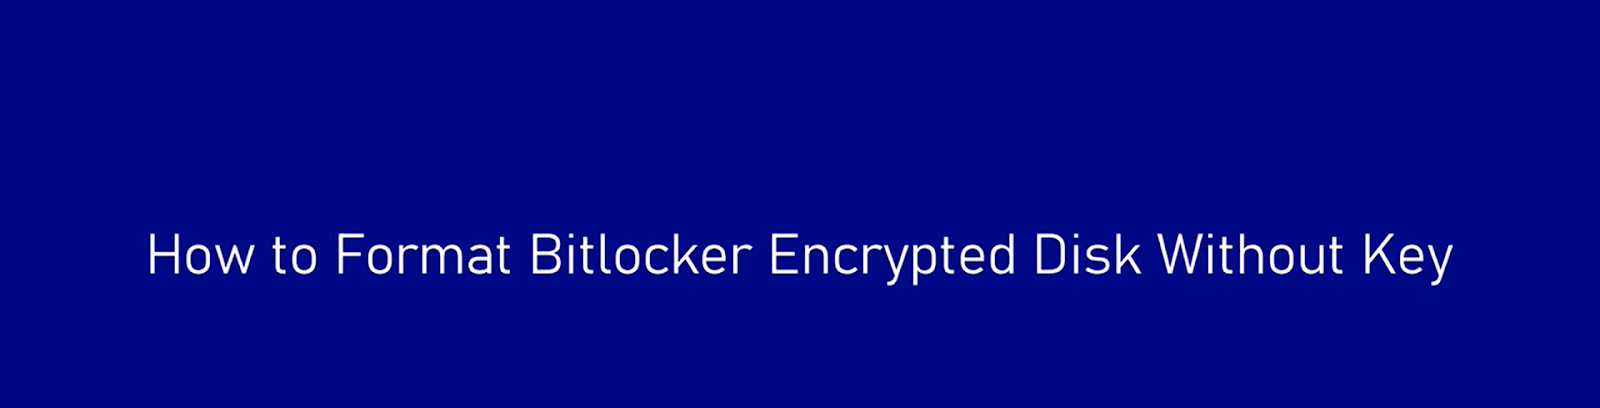 words how to format bitlocker encrypted disk without key